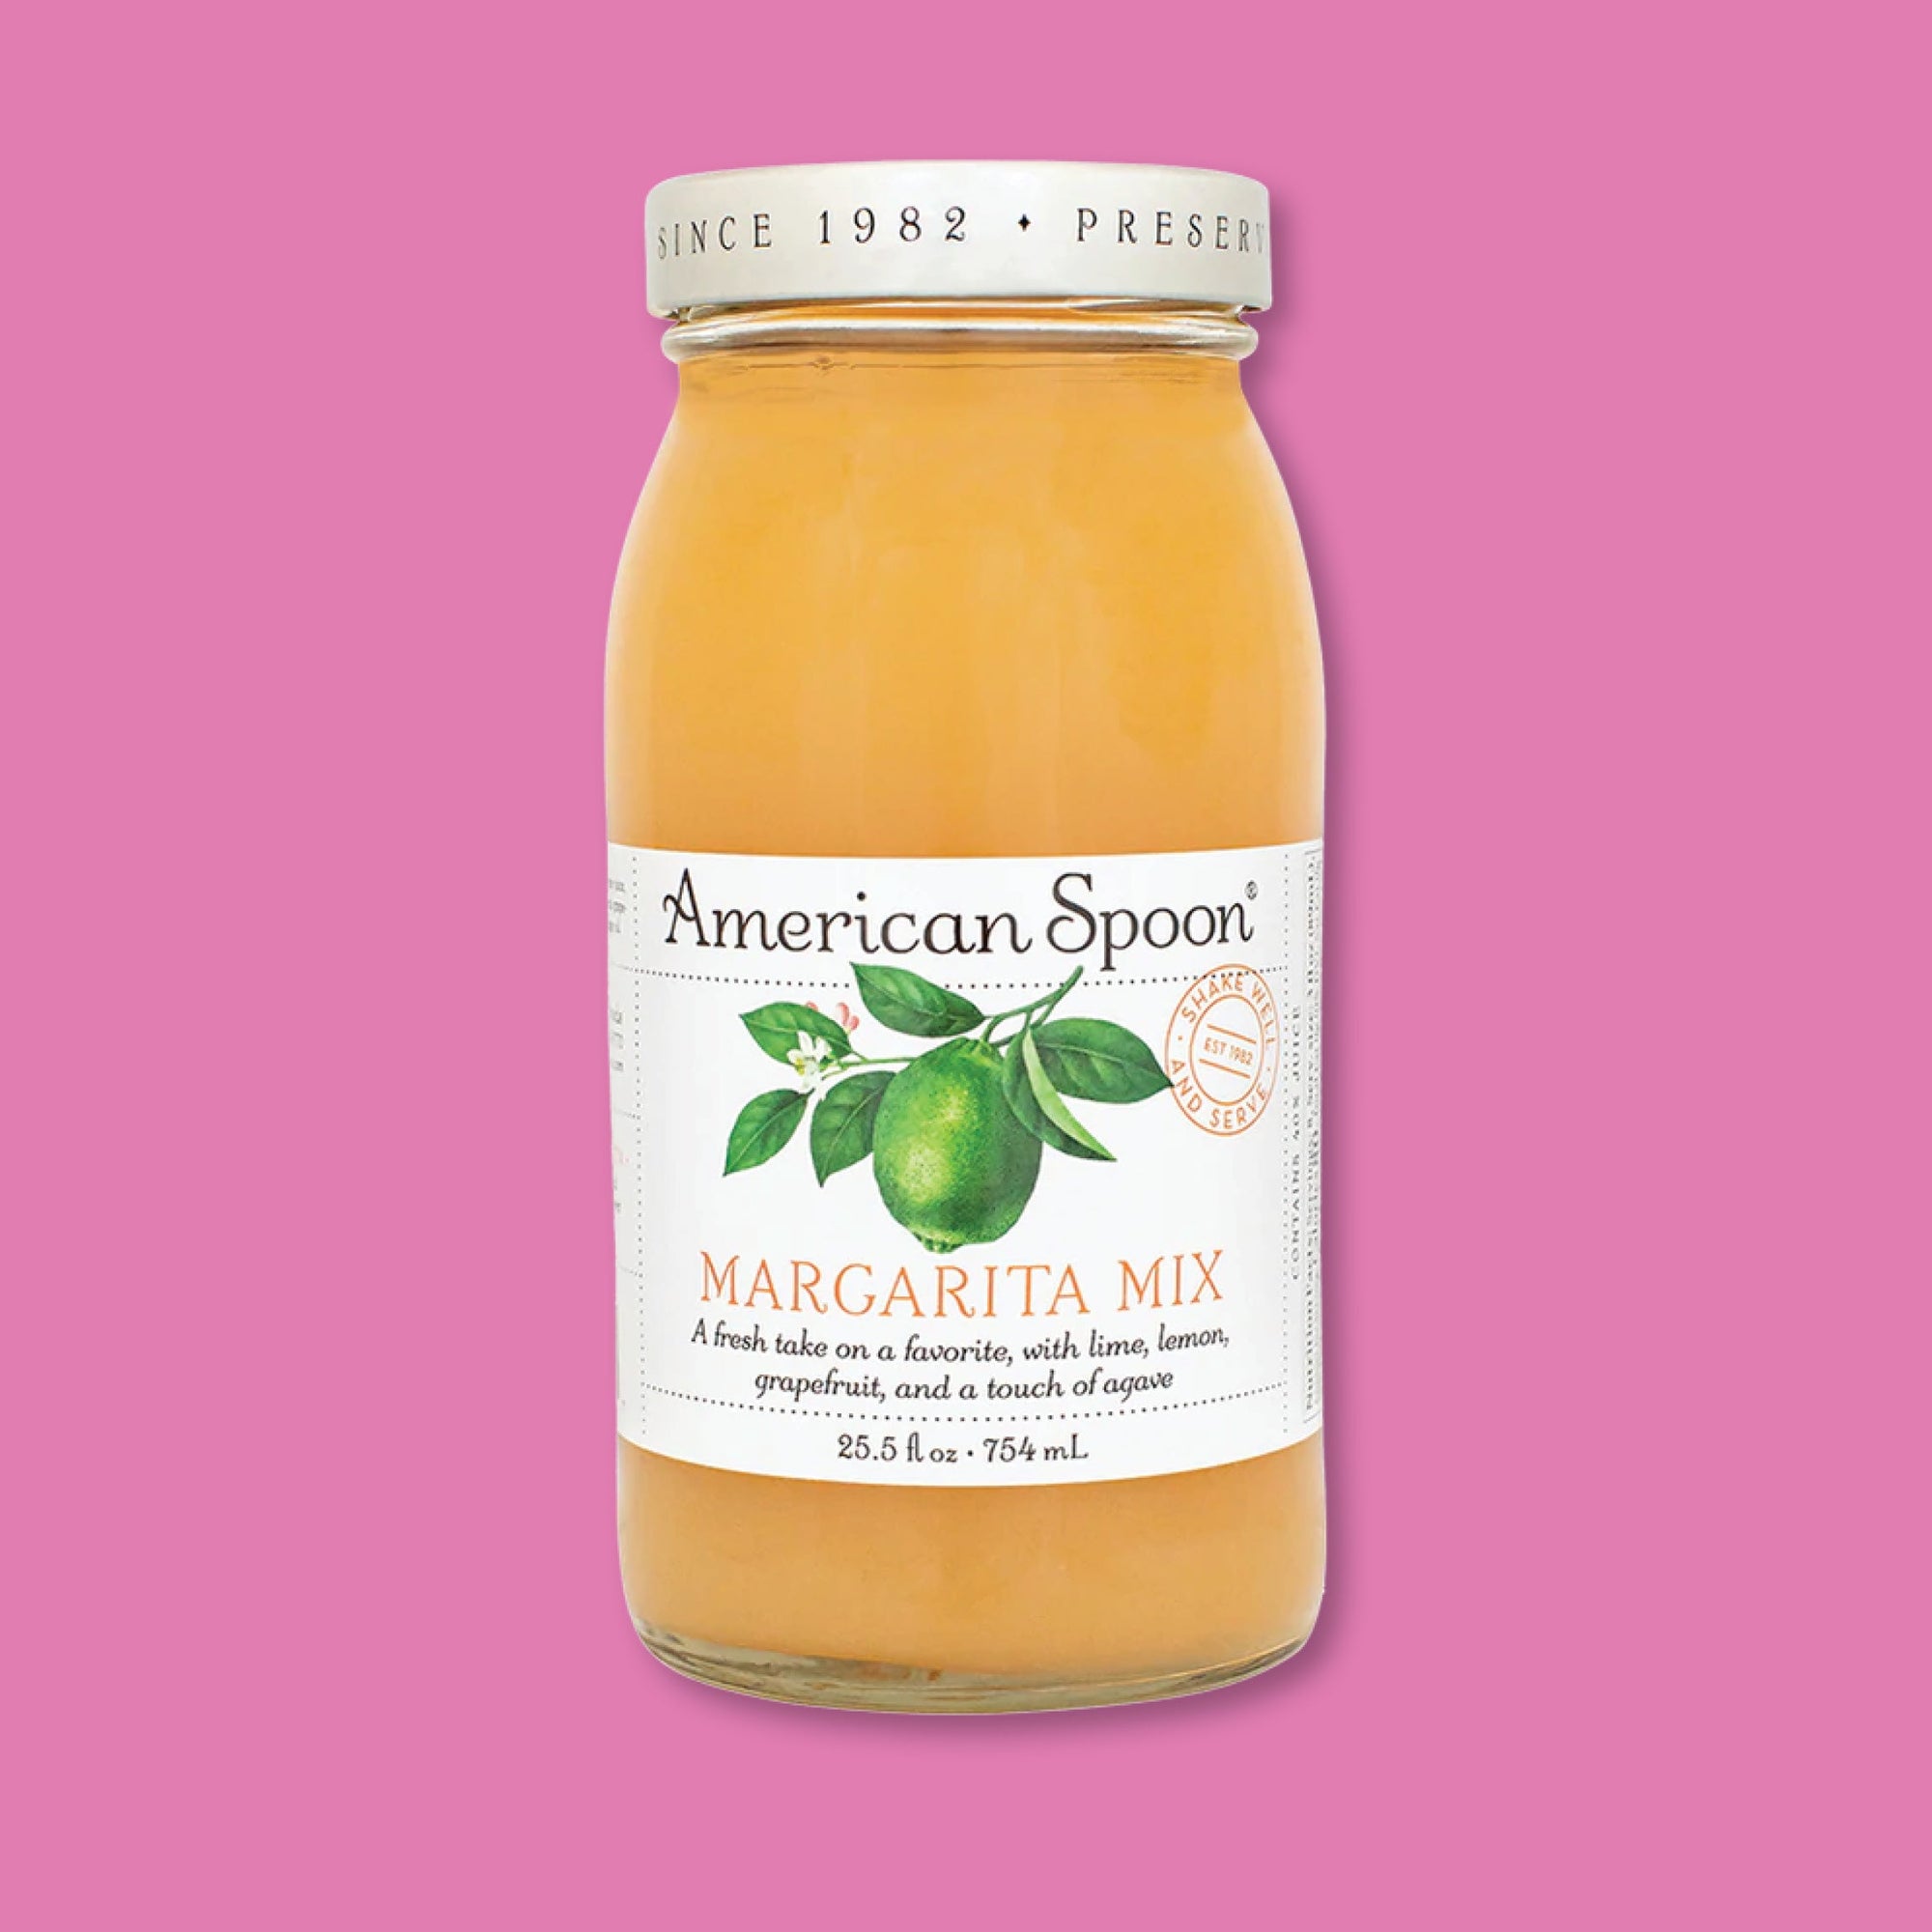 On a raspberry pink background sits a bottle. This glass bottle has a white lable with an illustration of a lime on a branch. It says "American Spoon MARGARITA MIX" in a serif font in black and orange. Under it says "A fresh take on a favorite, with lime, lemon, grapefruit, and a touch of agave" in a black, serif italic font. 25.5 fl oz • 754 mL